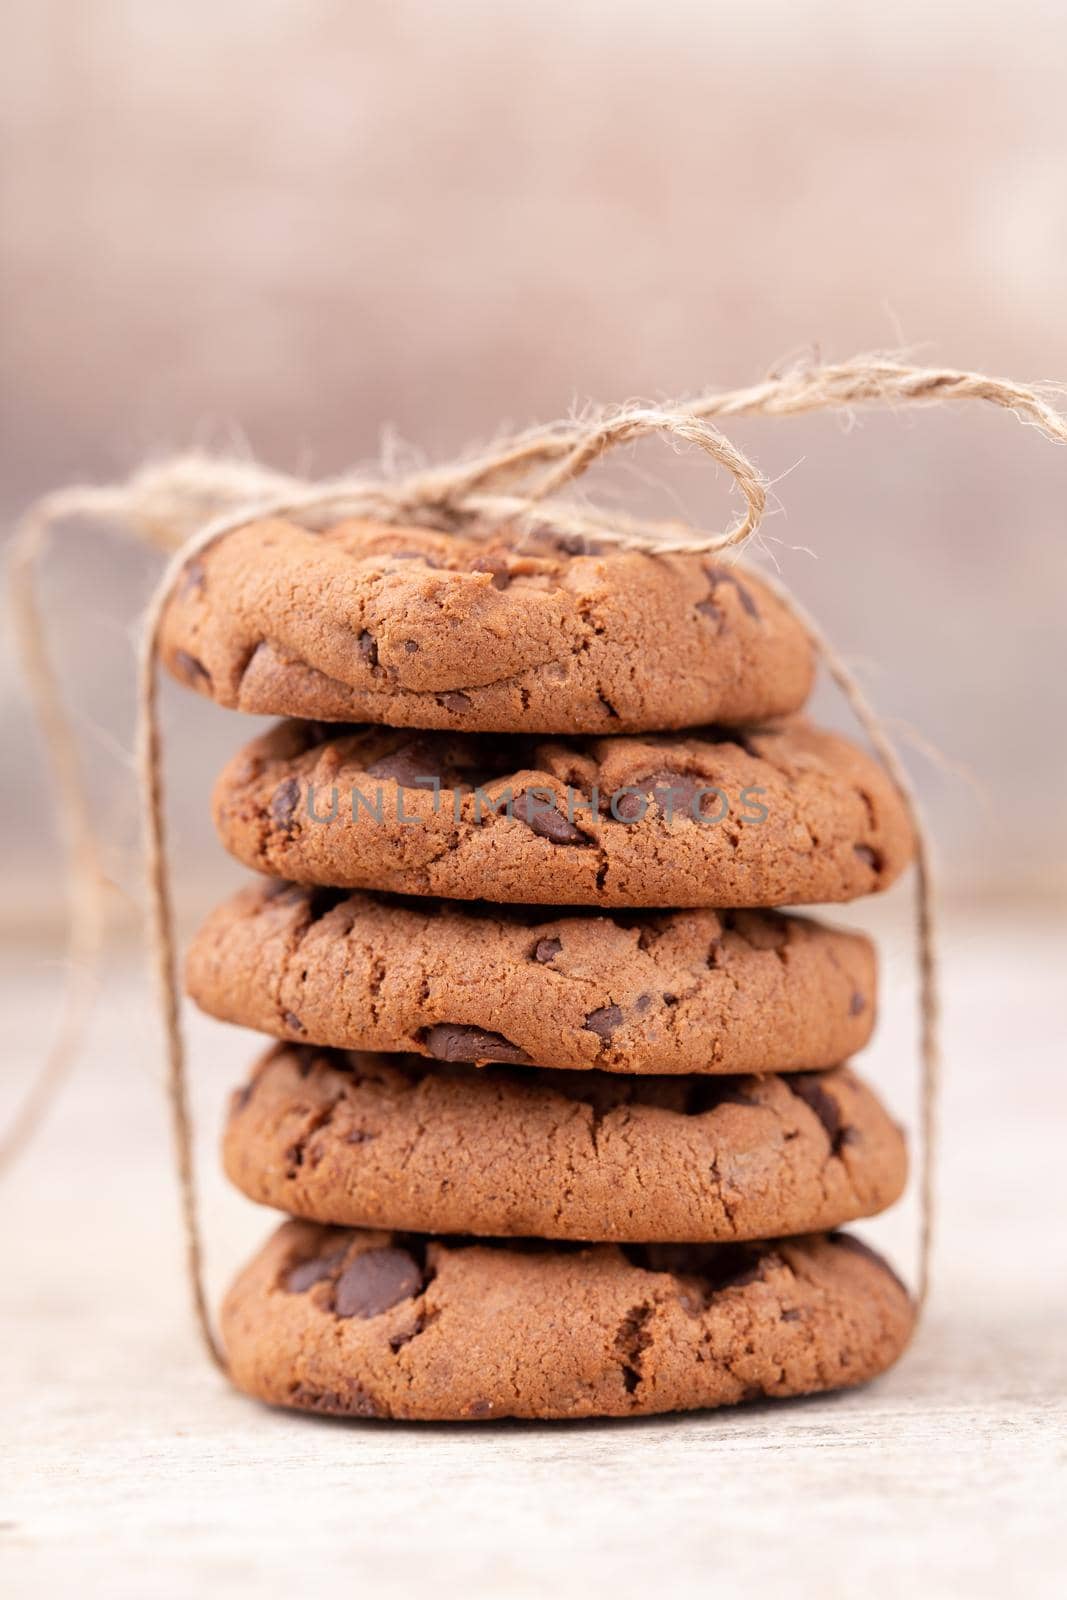 Image shows a stack of american chocolate chip cookies on rustic wooden plank. by gitusik